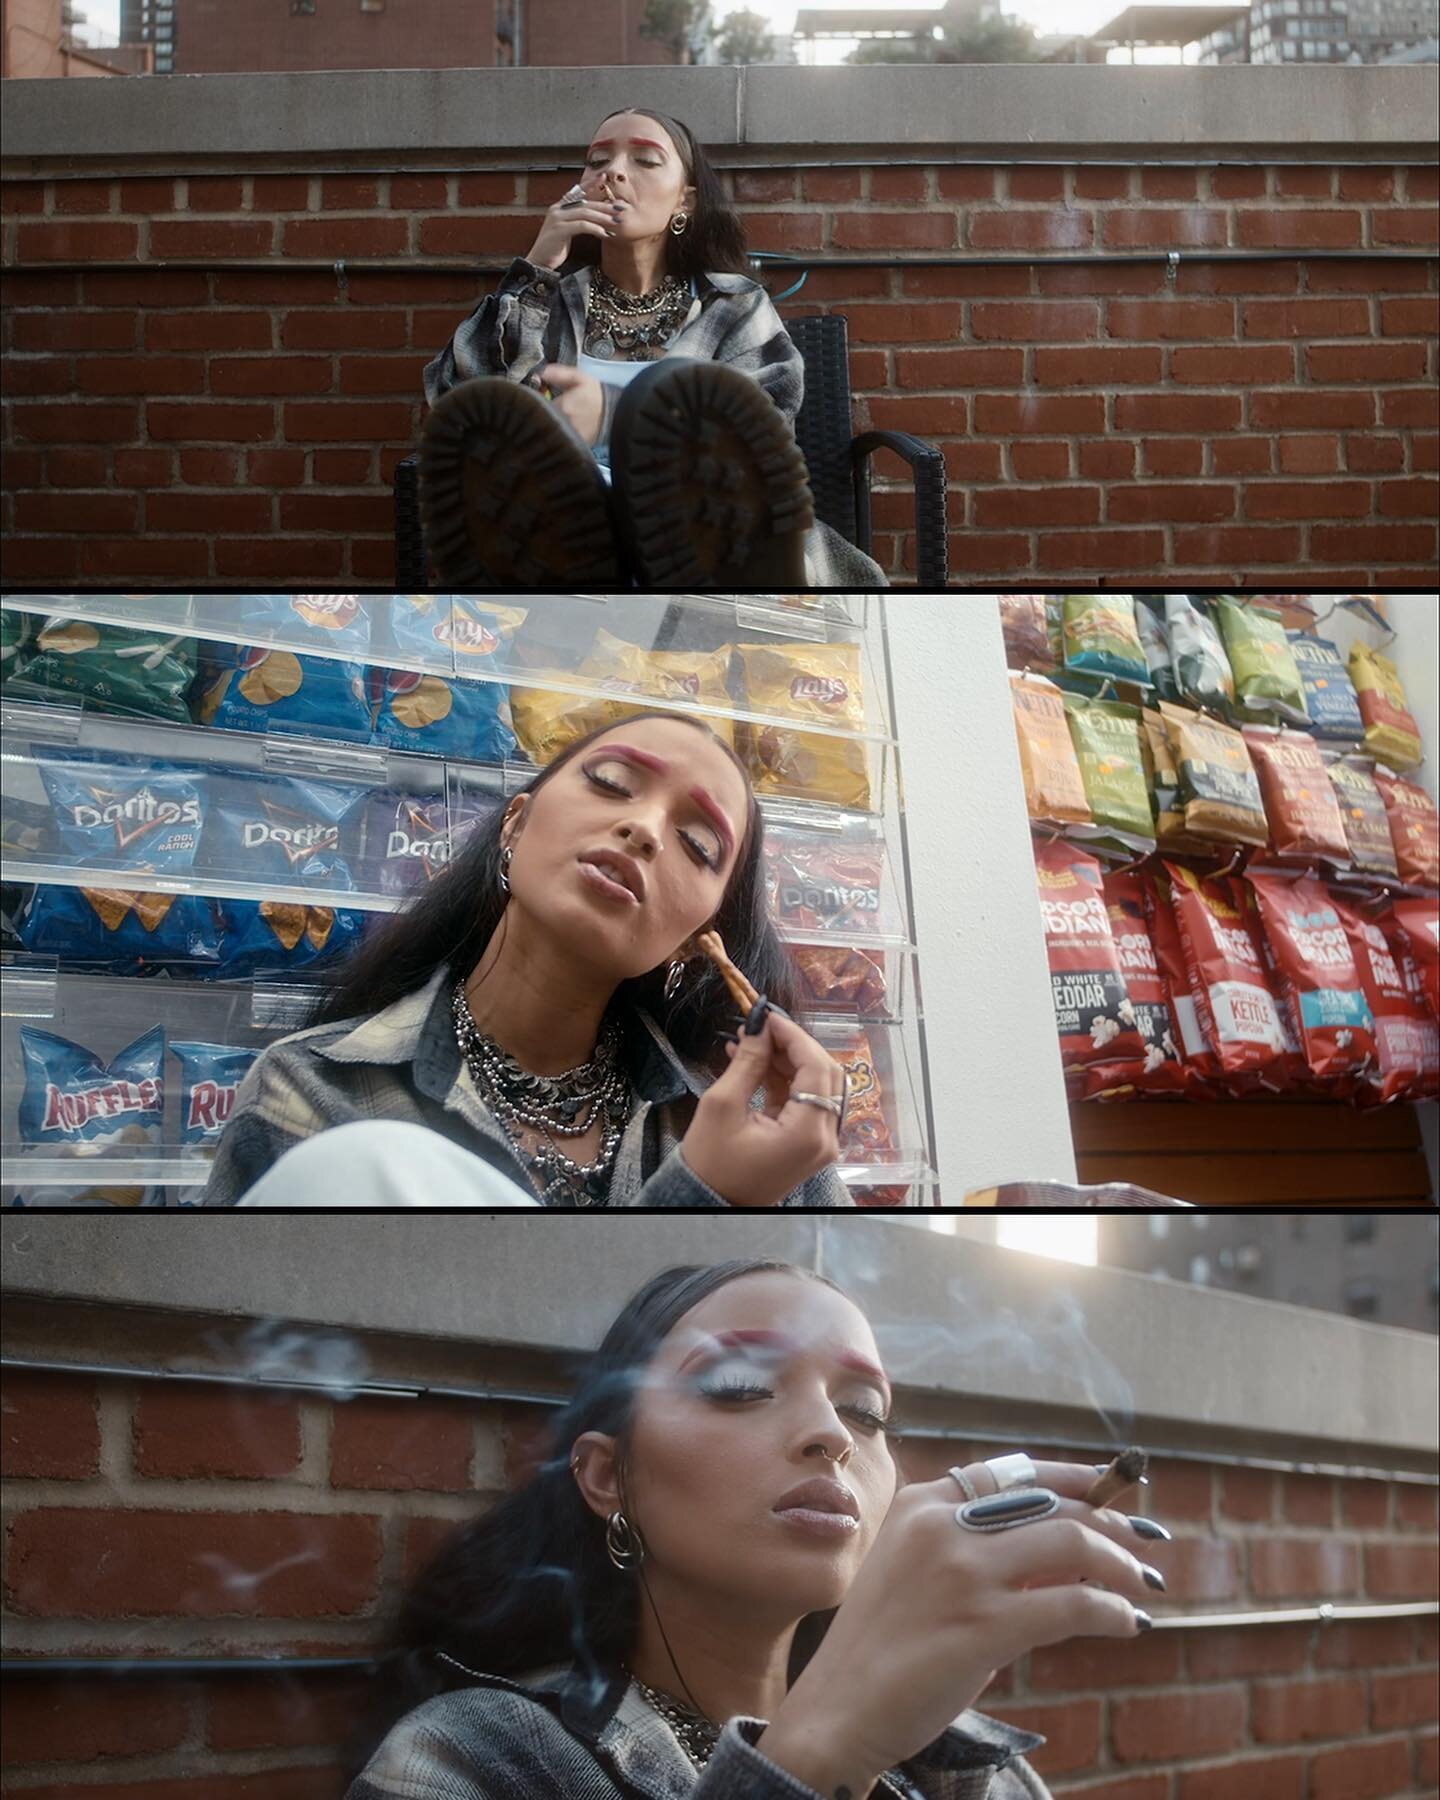 some stills and BTS clips from an unreleased music video in the works with @iamsharisilver ‼️

dir: @chels.lynn 
dp: @gao.dzilla 

#production #cinematography #film #musicvideos #doritos